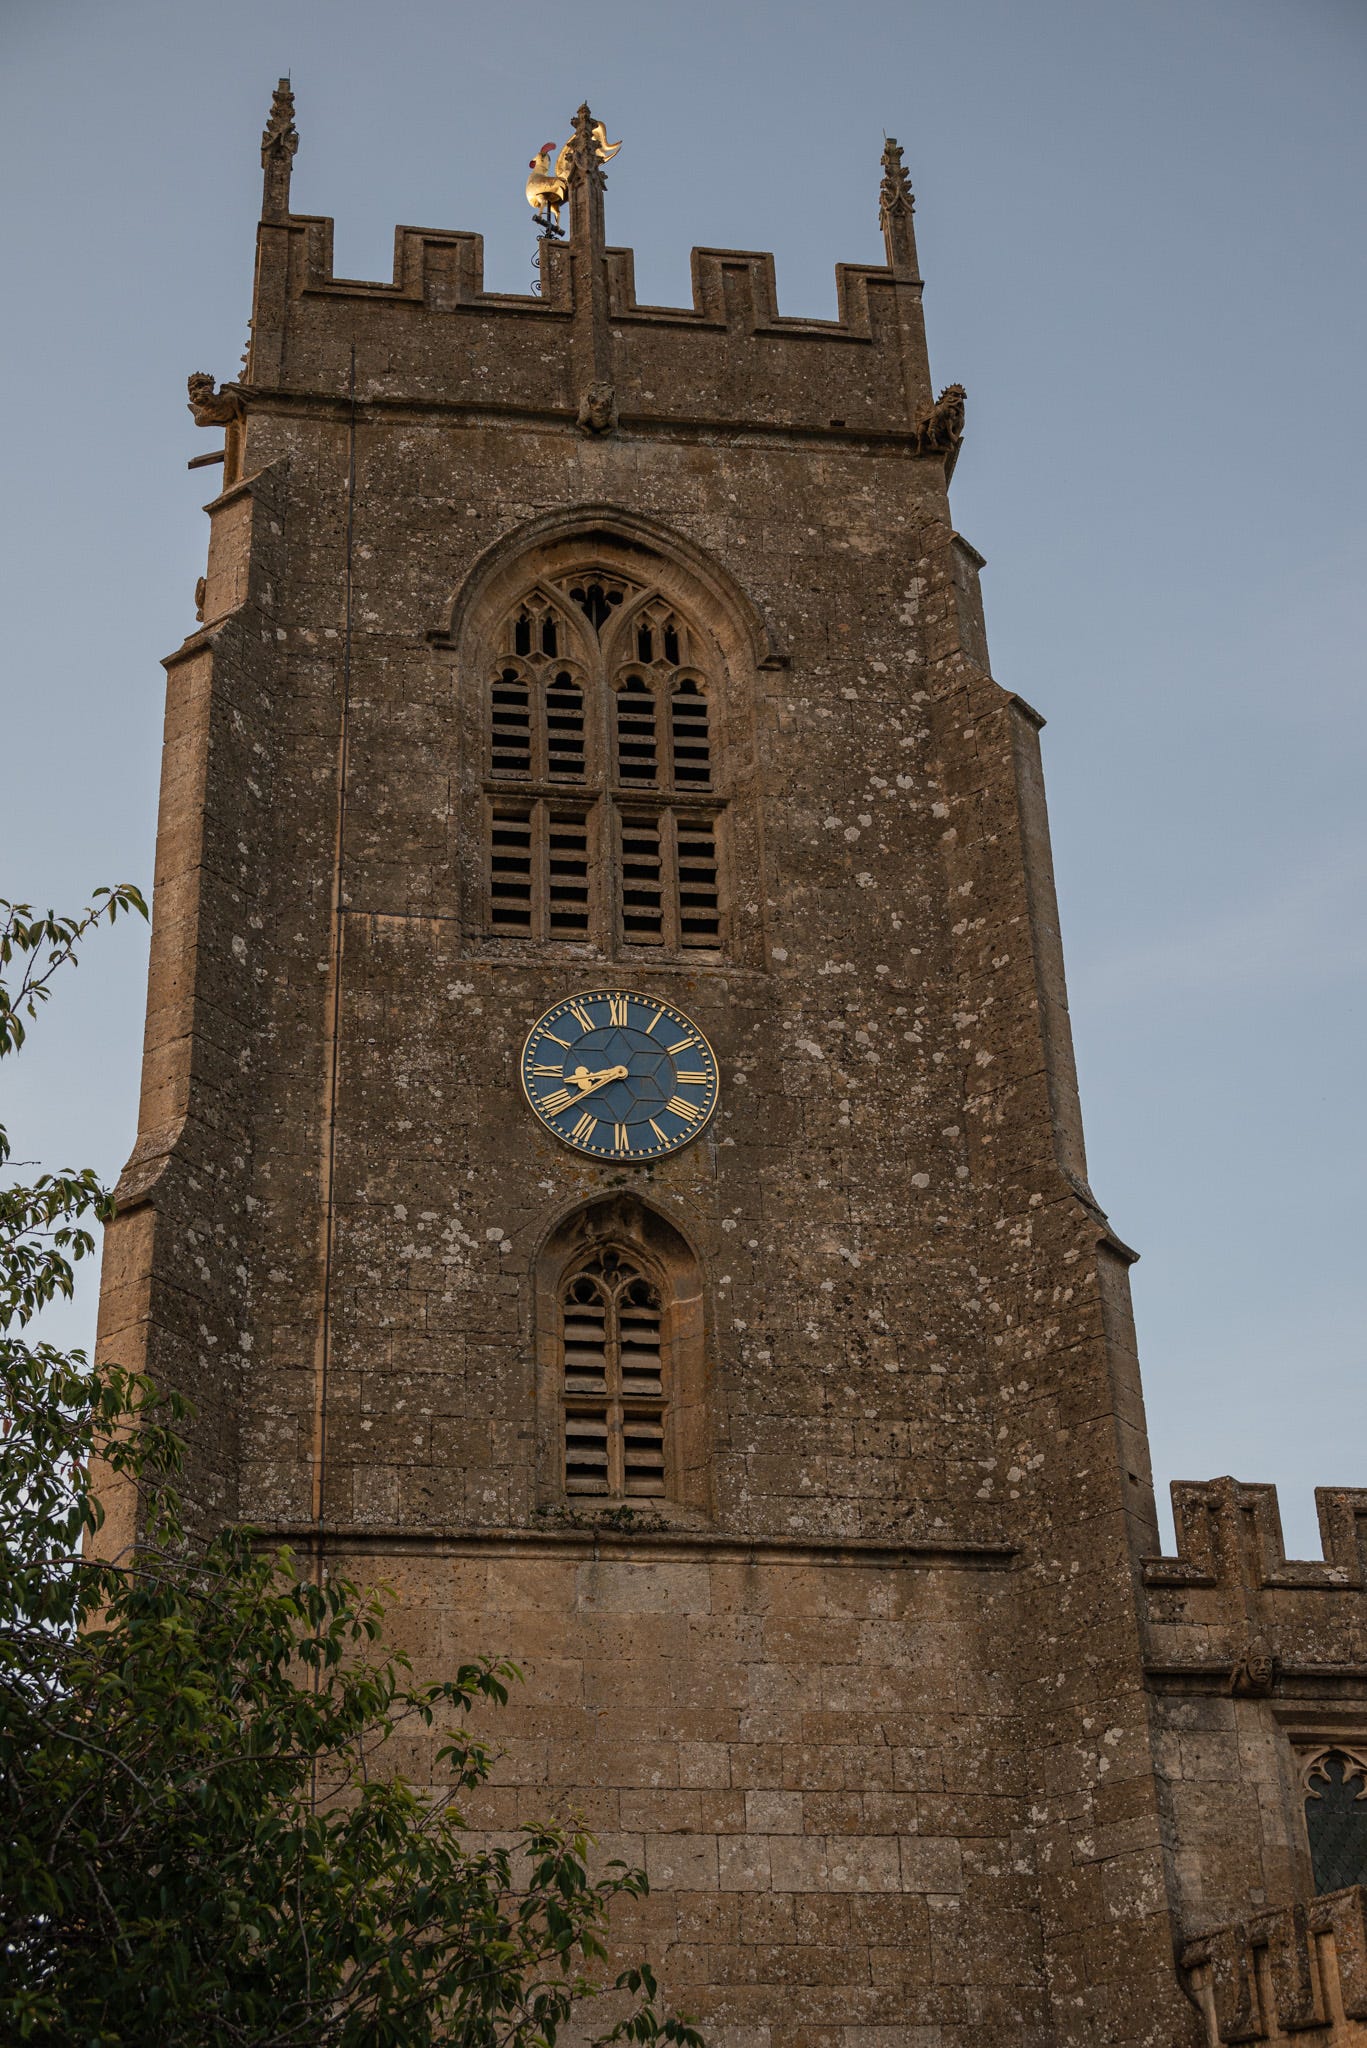 St Peter’s Church tower in Winchcombe, England with the blue-faced clock at 8:39 PM against a blue darkening evening sky